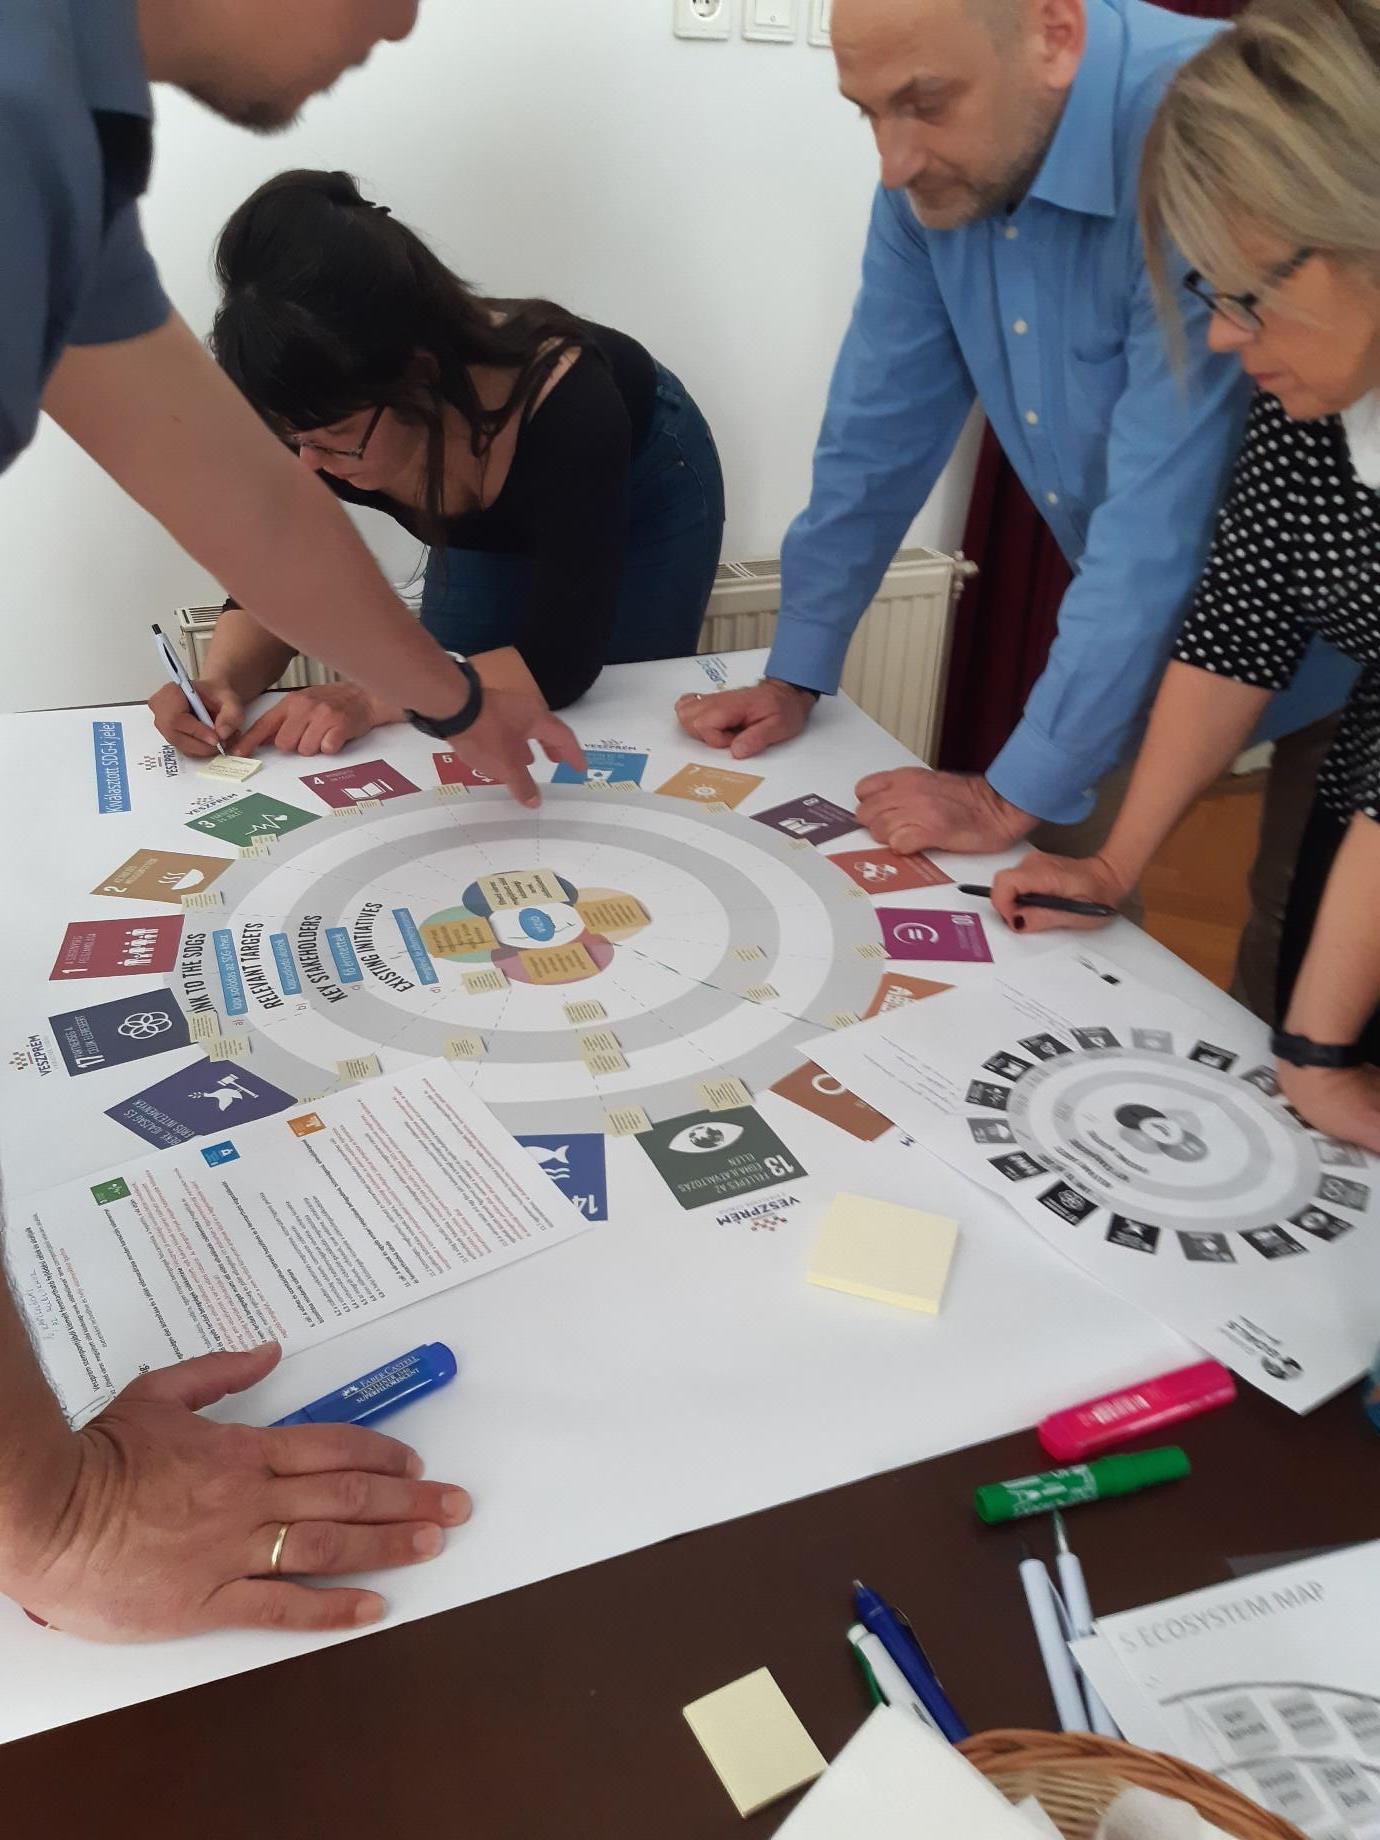 Members of Veszprém’s URBACT Local Group use the Vision Wheel tool to identify their cross-cutting mission addressing several SDGs 